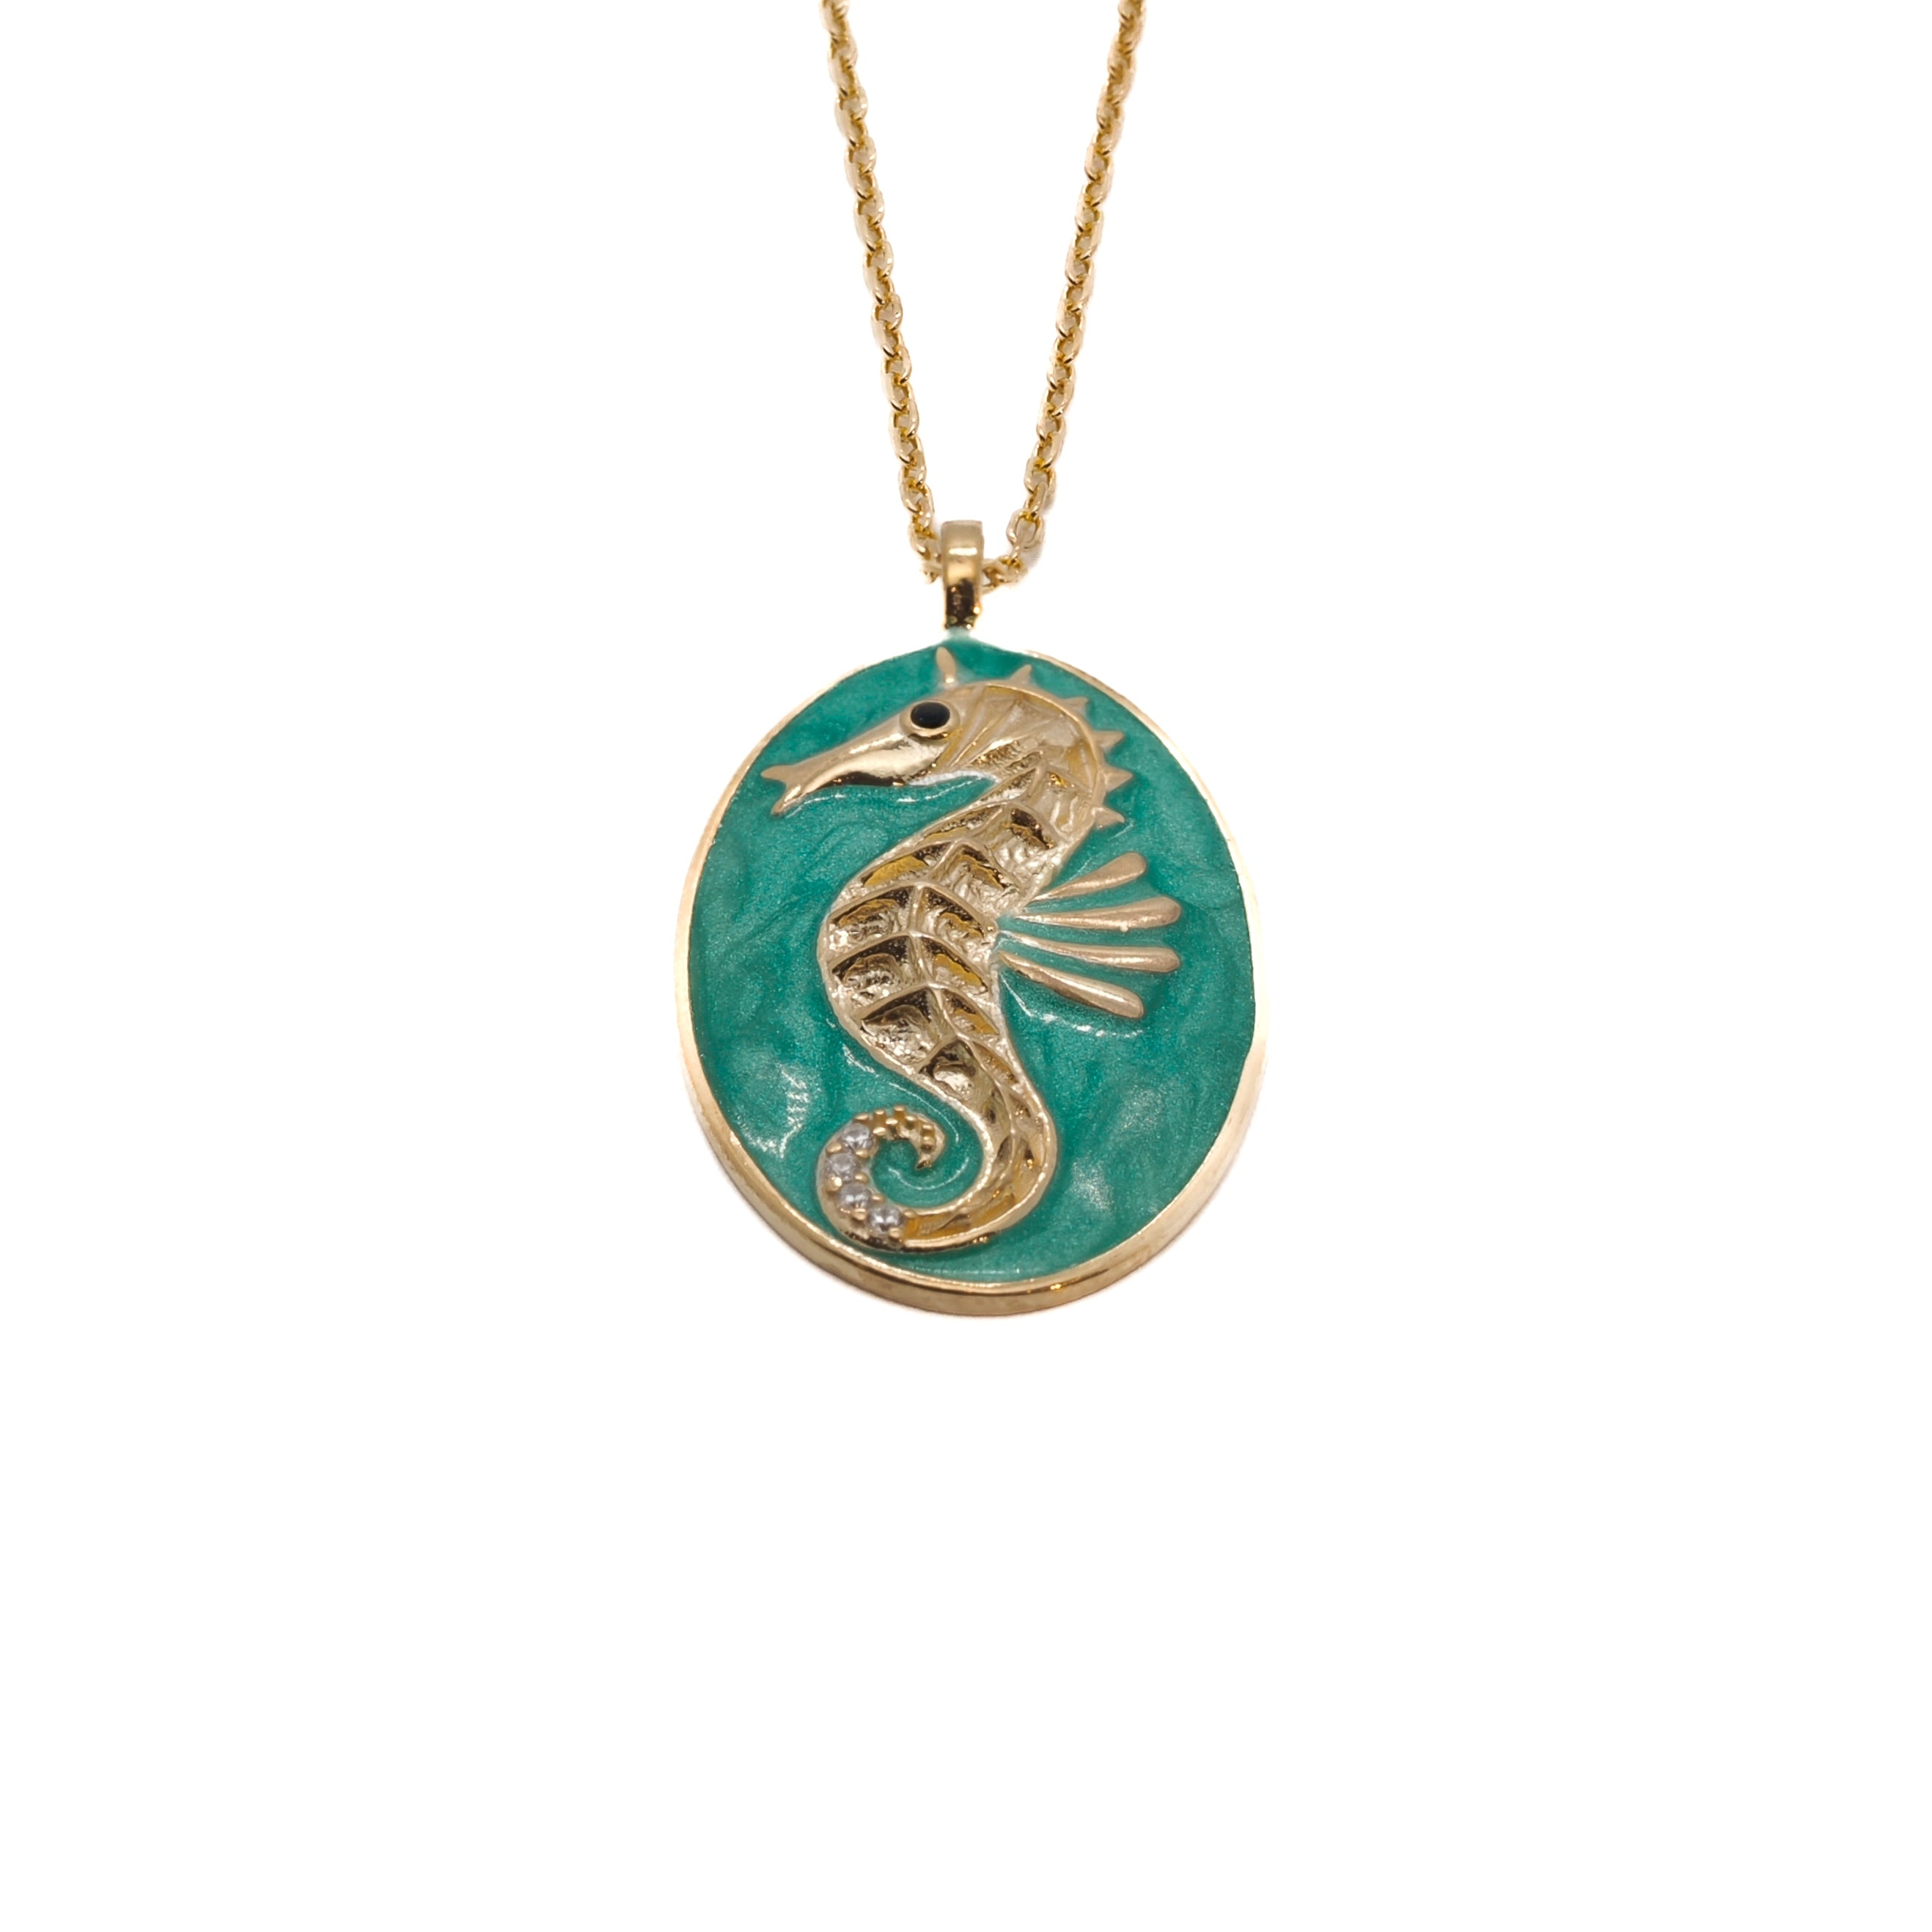 A close-up of the Spirit Animal Green Seahorse Necklace, showcasing the intricate detailing and captivating green enamel of the seahorse pendant.